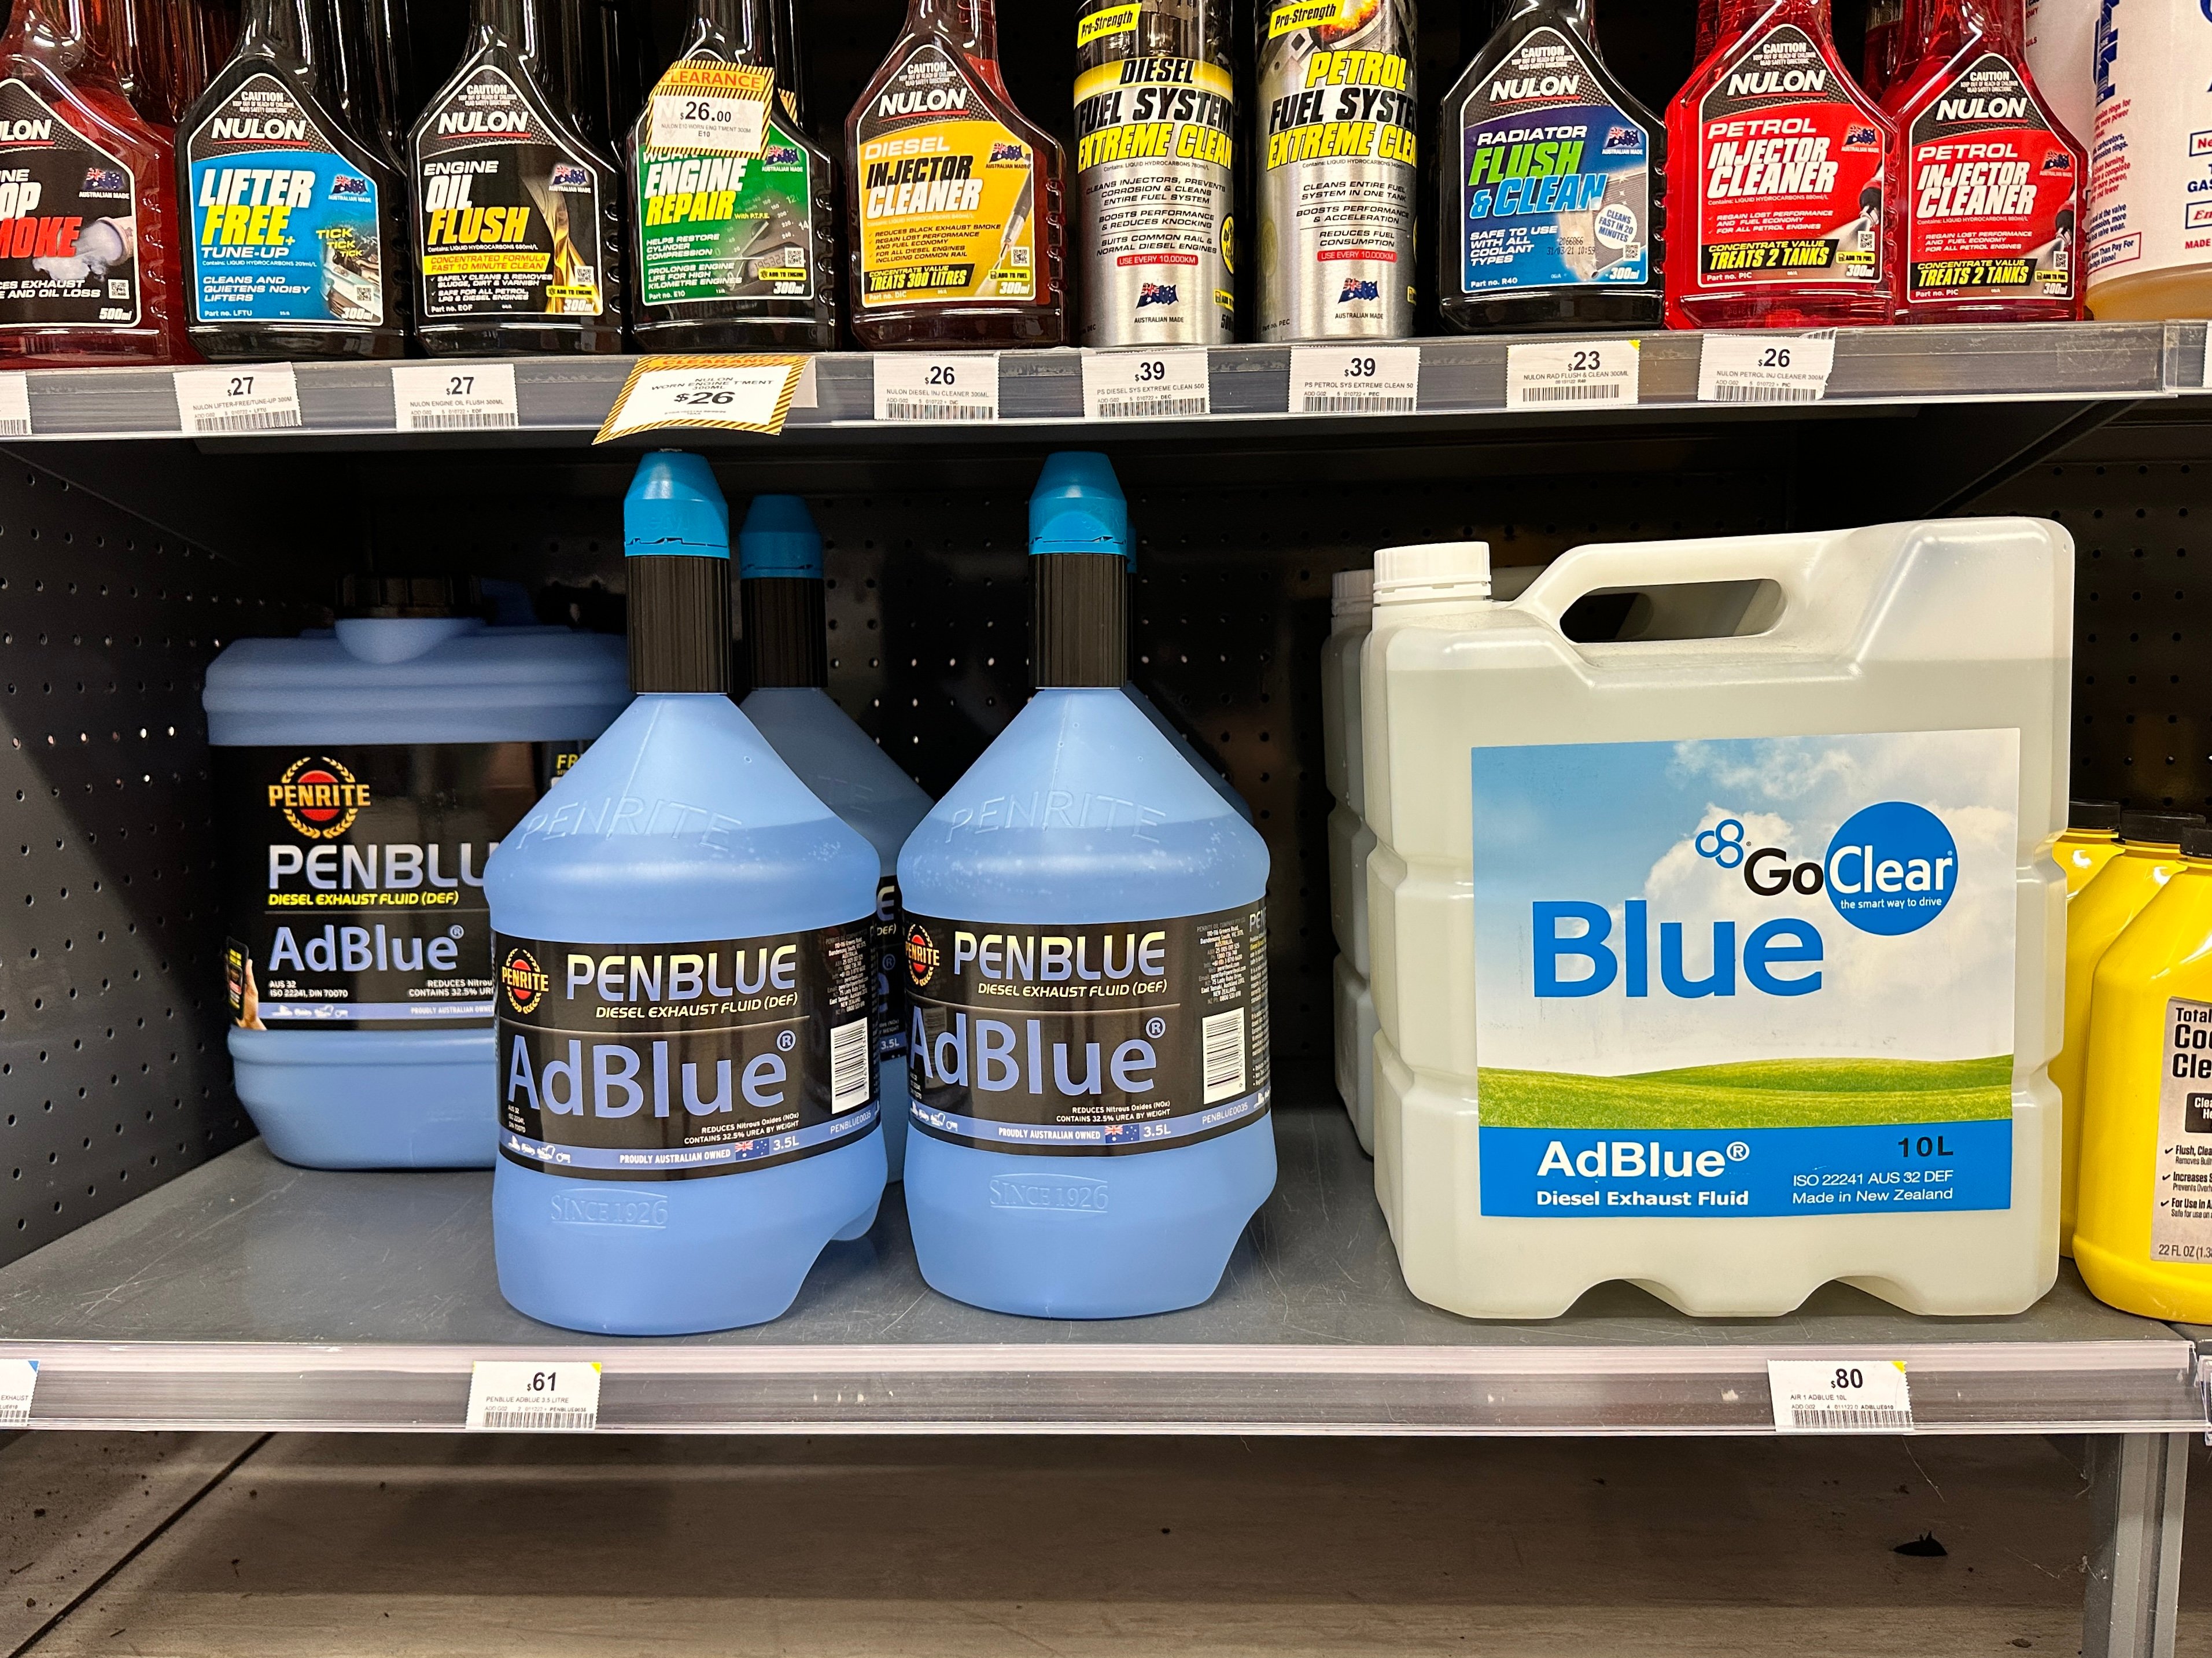 Truck Adblue Fuel Additive - Highly Efficient